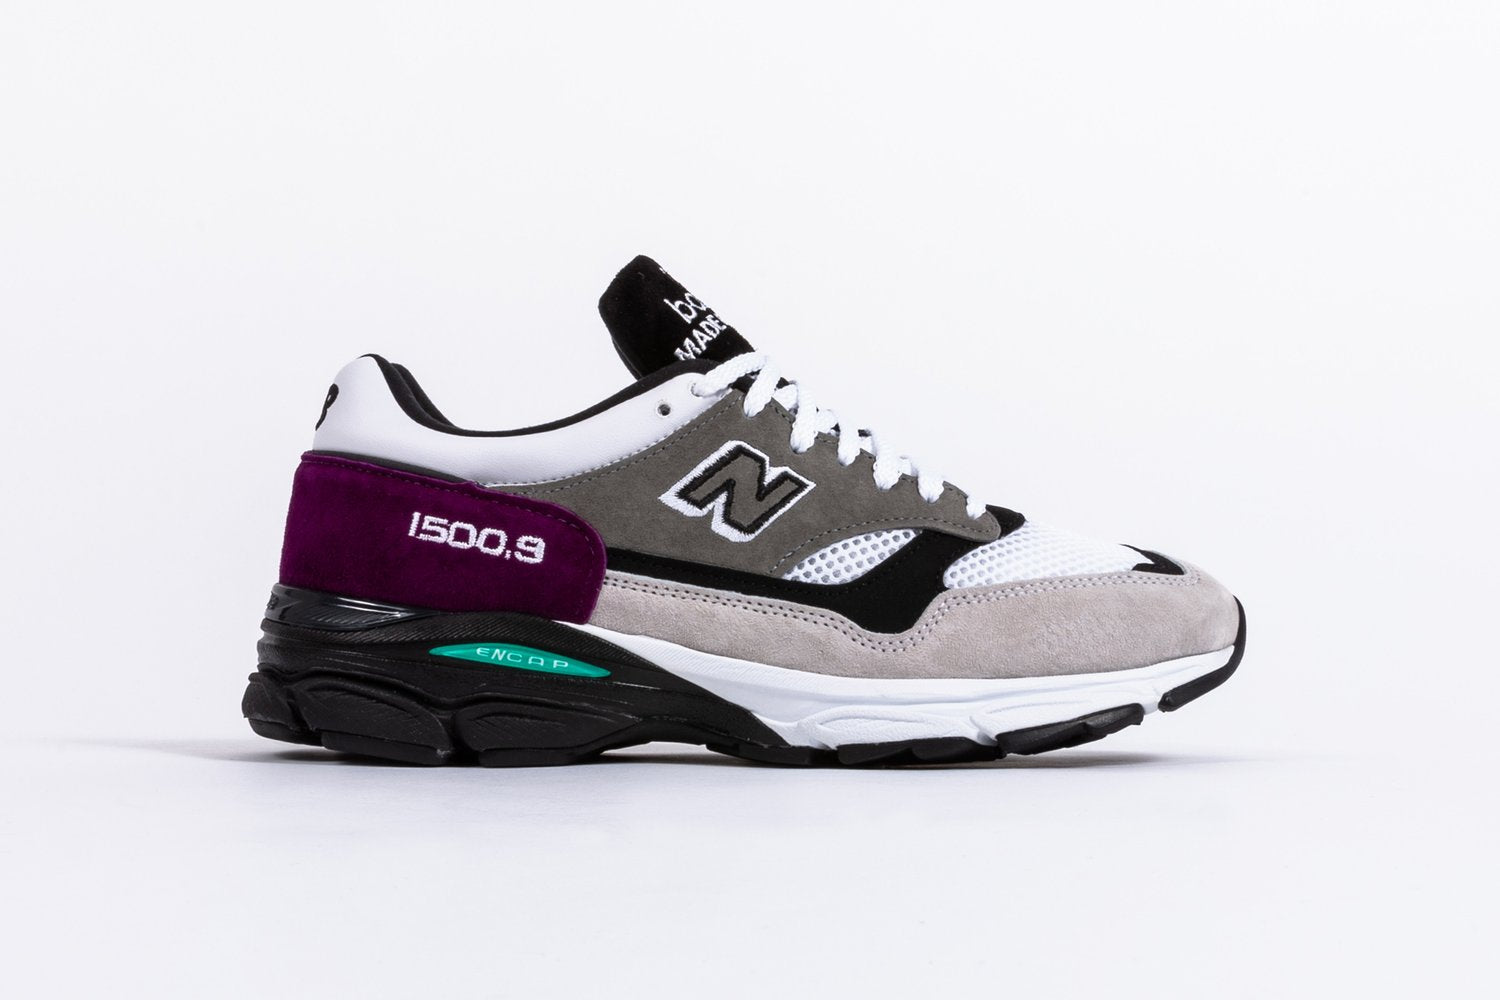 New Balance M1500.9EC Made in England